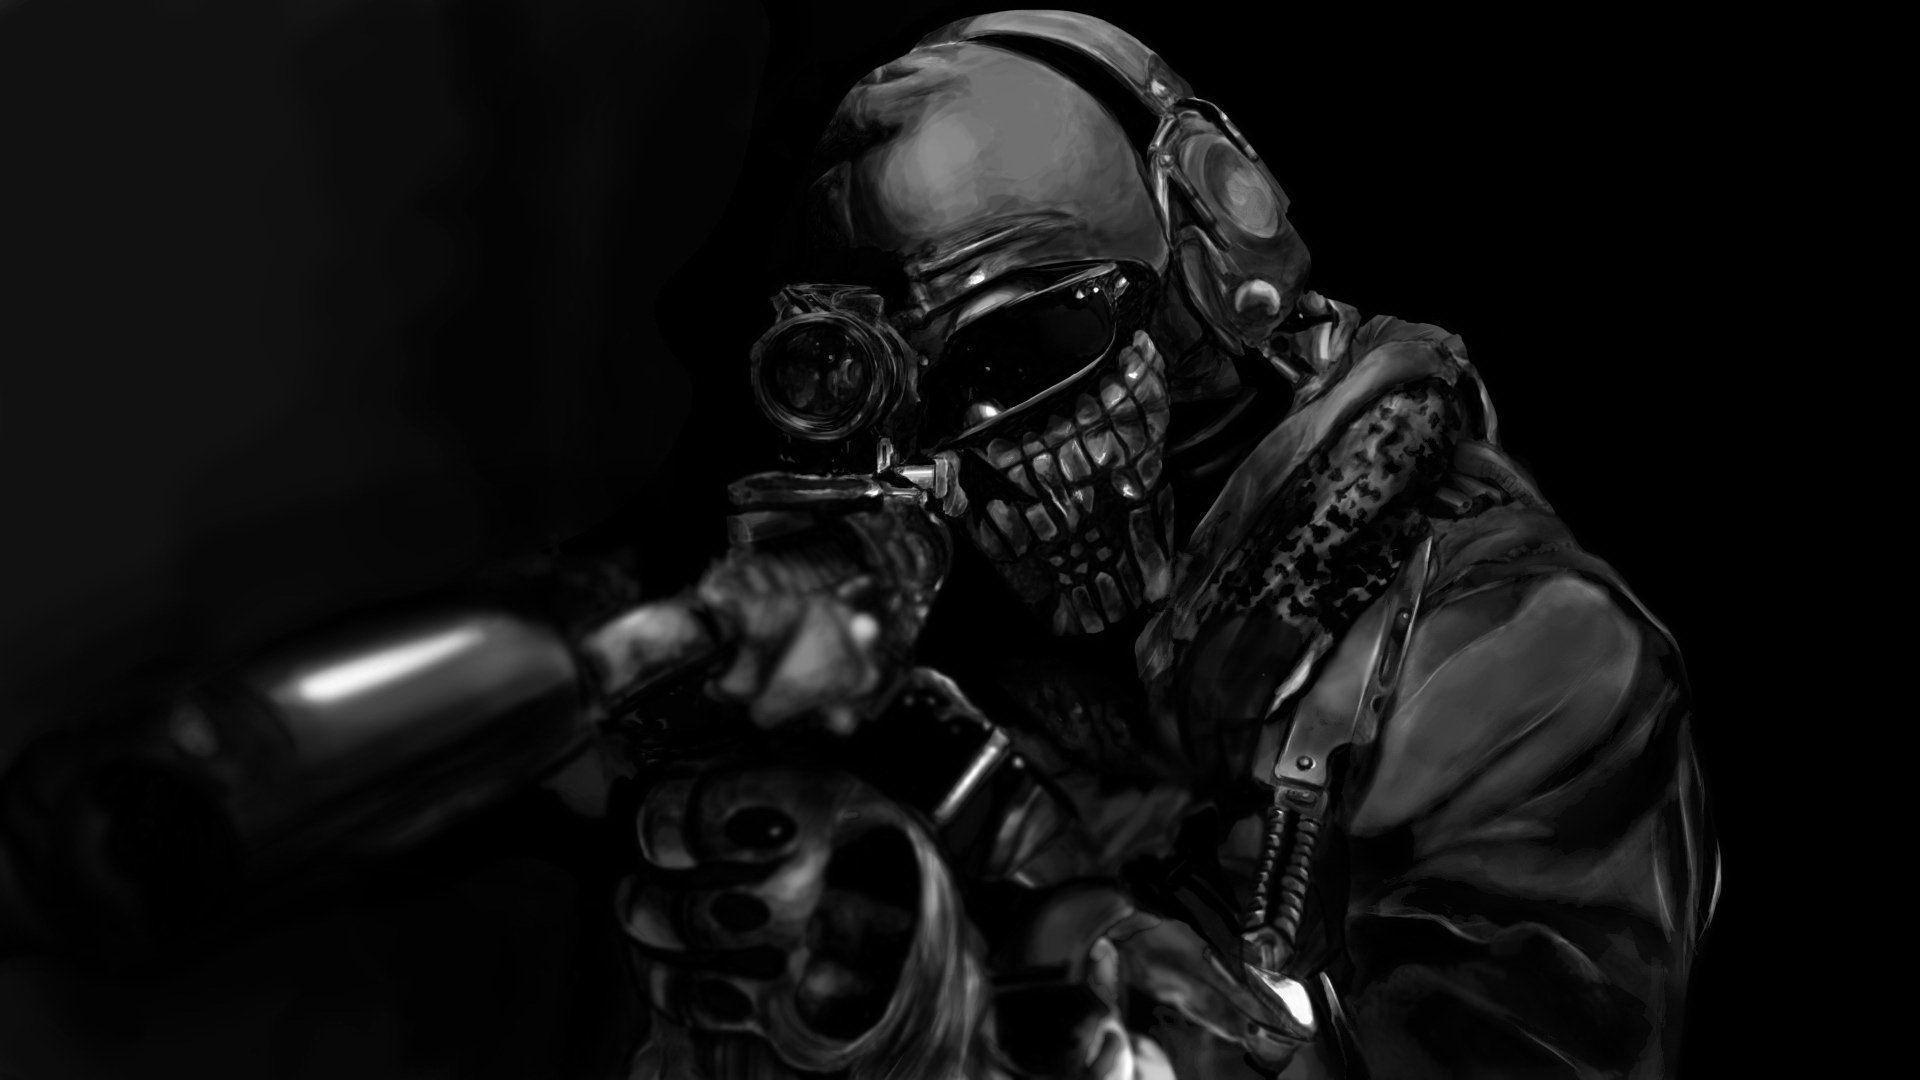 Call Of Duty Ghosts wallpaperx1080